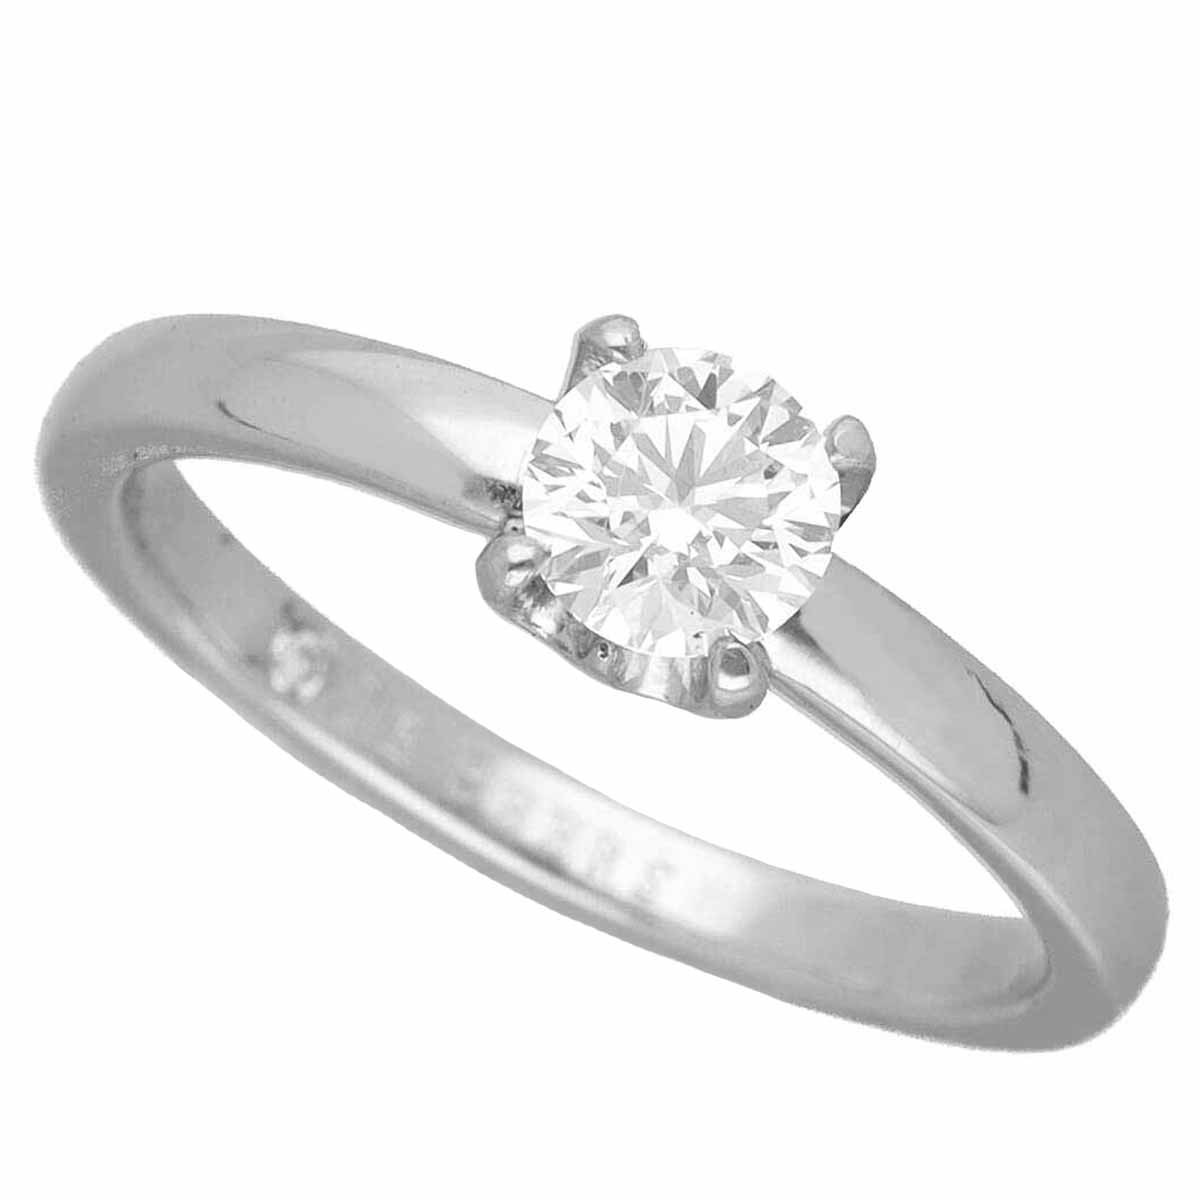 De Beers De Beers DB Classic sleigh tia ring diamond (0.32ct I-IF-Ex) Pt950 platinum Japan size approximately 6 number #46 GIA expert evidence 